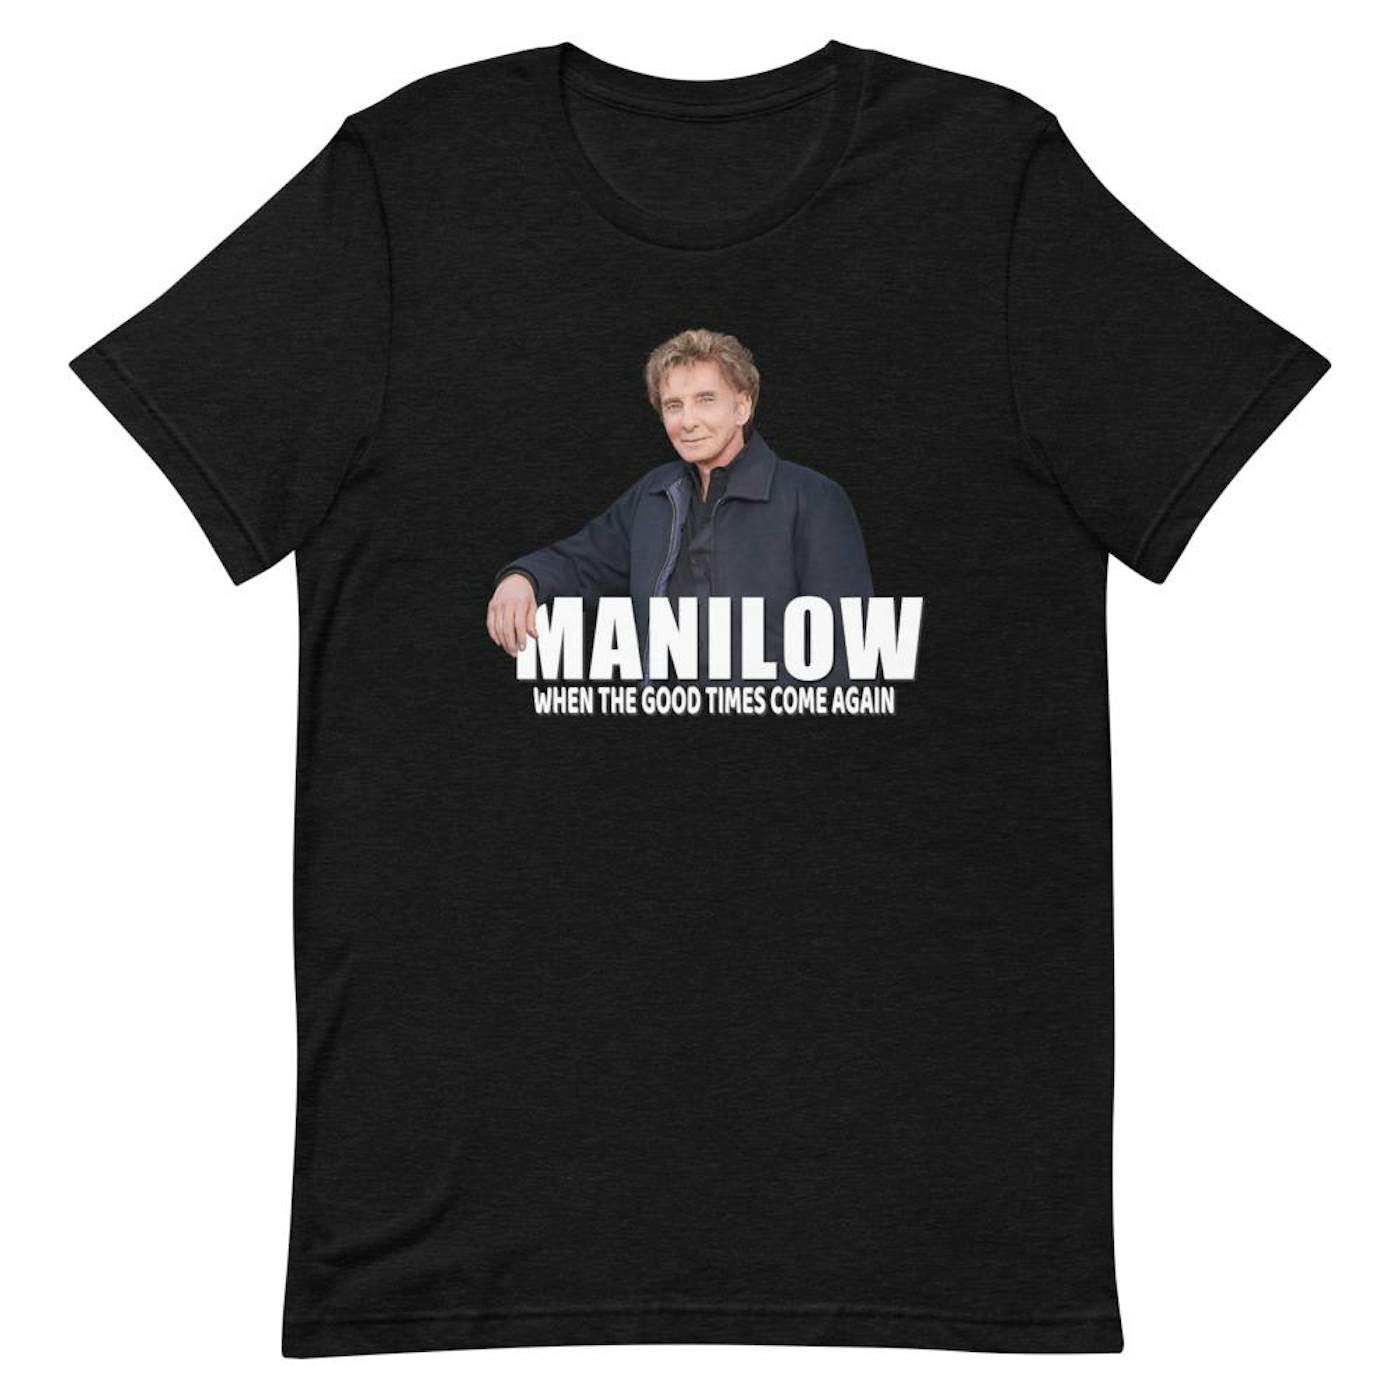 Barry Manilow MANILOW Titles Short Shorts